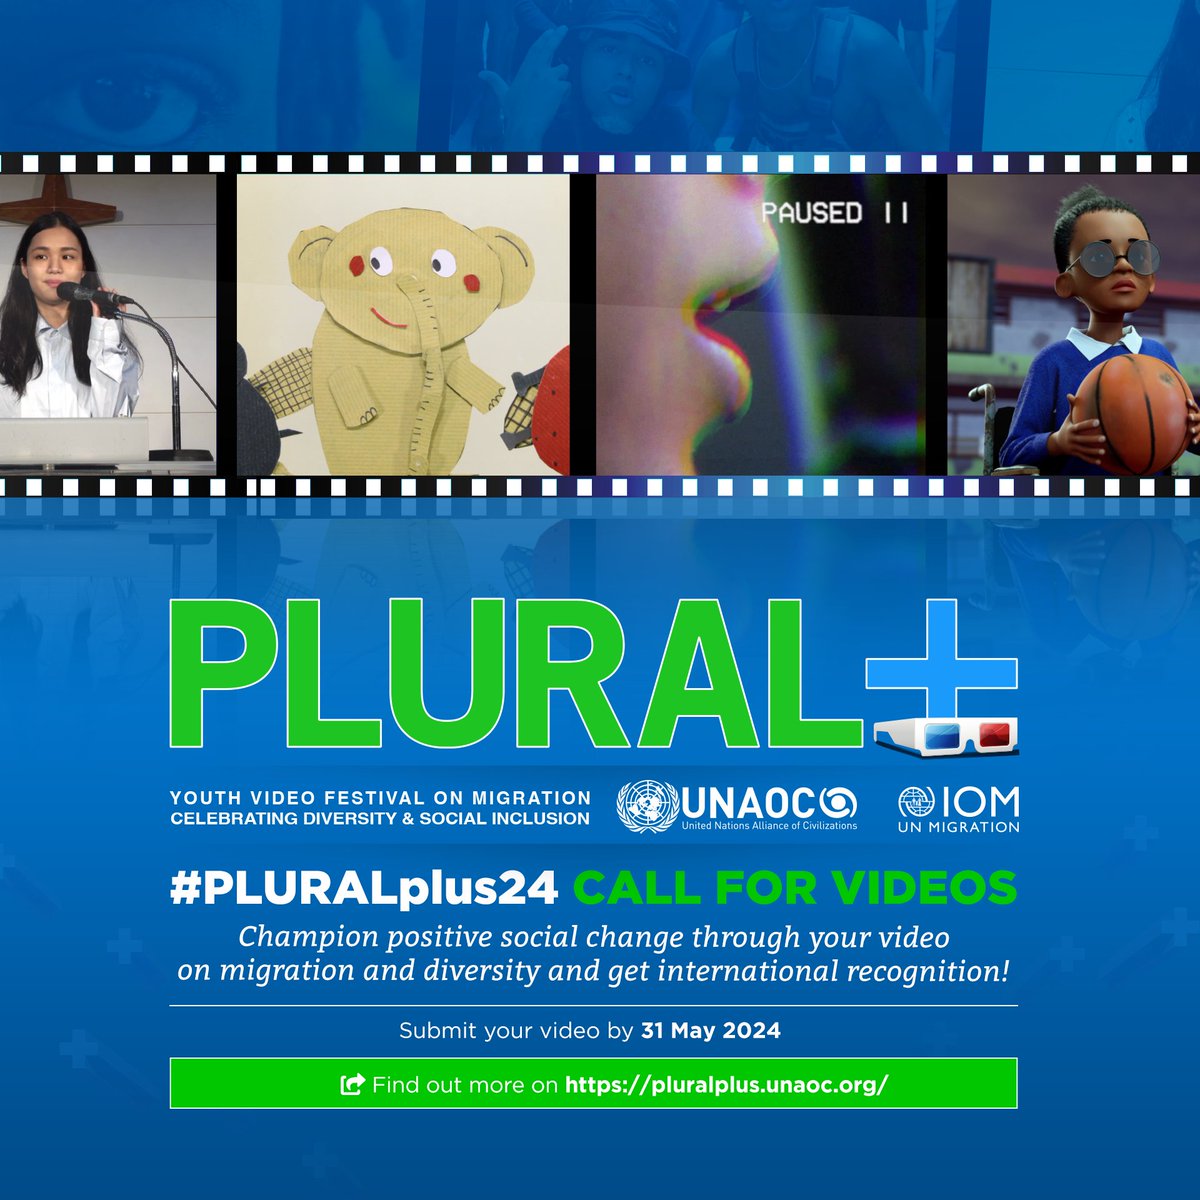 Human Rights advocate? Passionate about migration & social inclusion? Champion for combating xenophobia? Share your short 🎥with #PLURALplus24 & get a chance to screen it at an international festival! Deadline May 31: pluralplus.unaoc.org